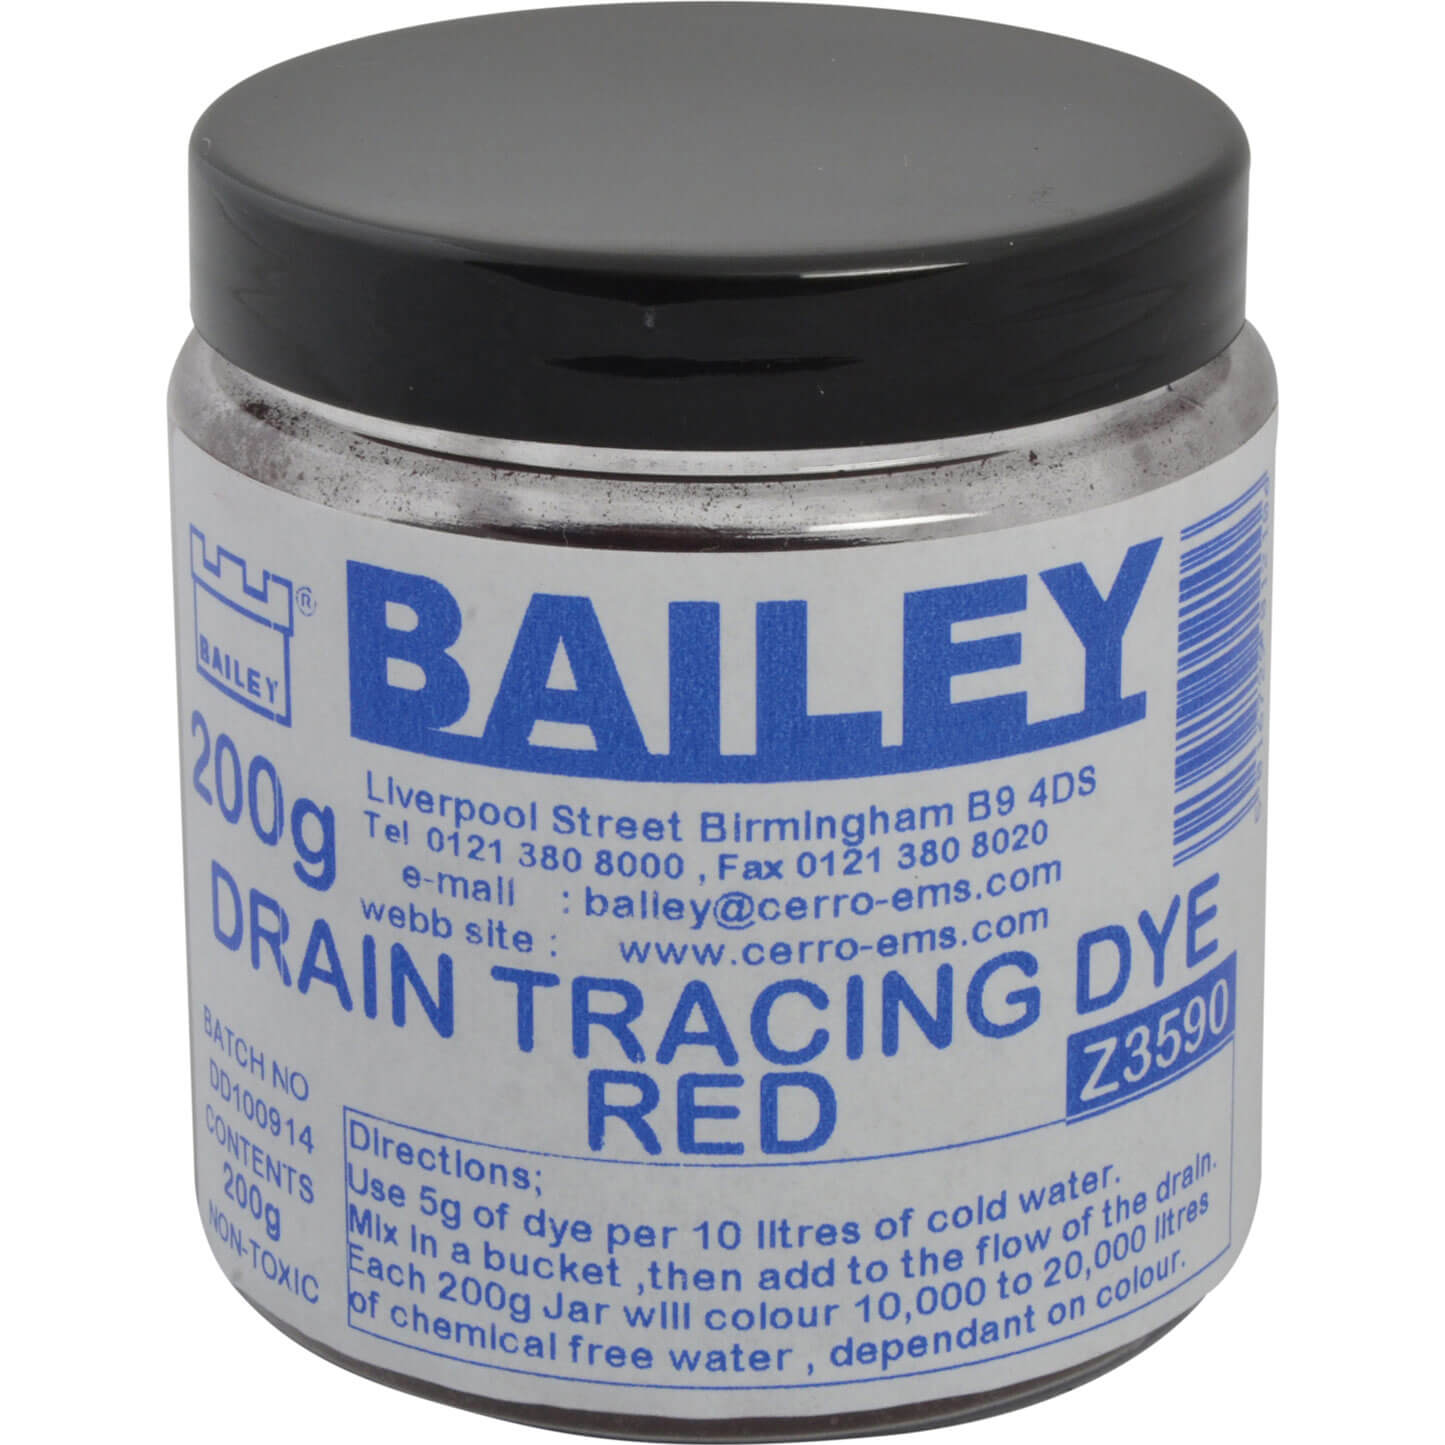 Photo of Bailey Drain Tracing Dye Red 200g